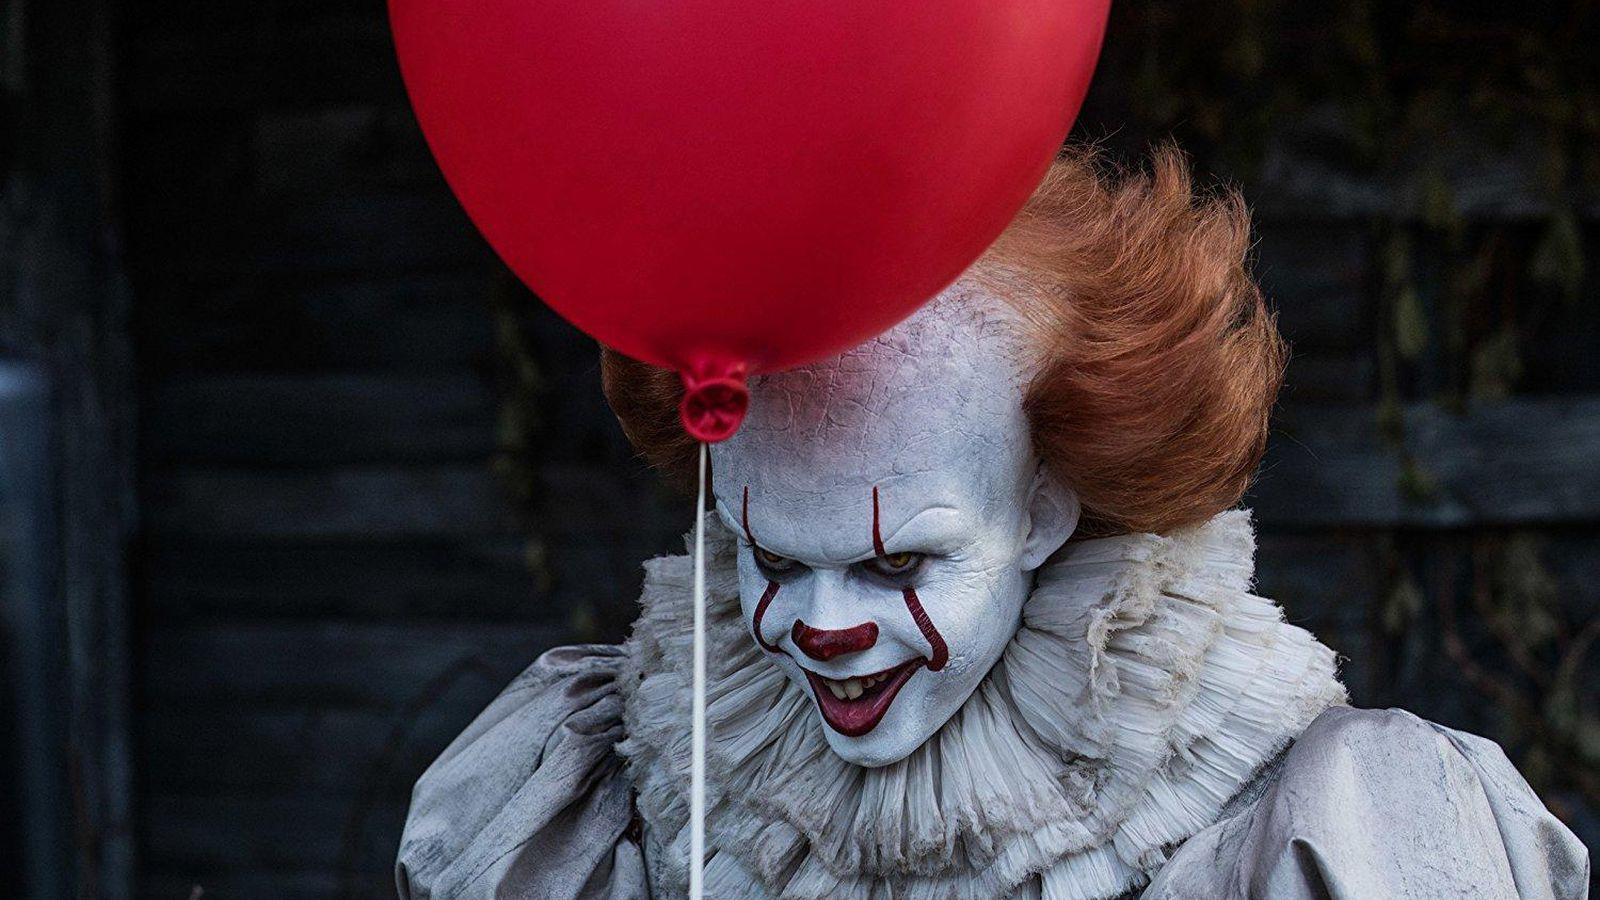 It: Chapter Two: Release date, cast, plot, theories, rumors